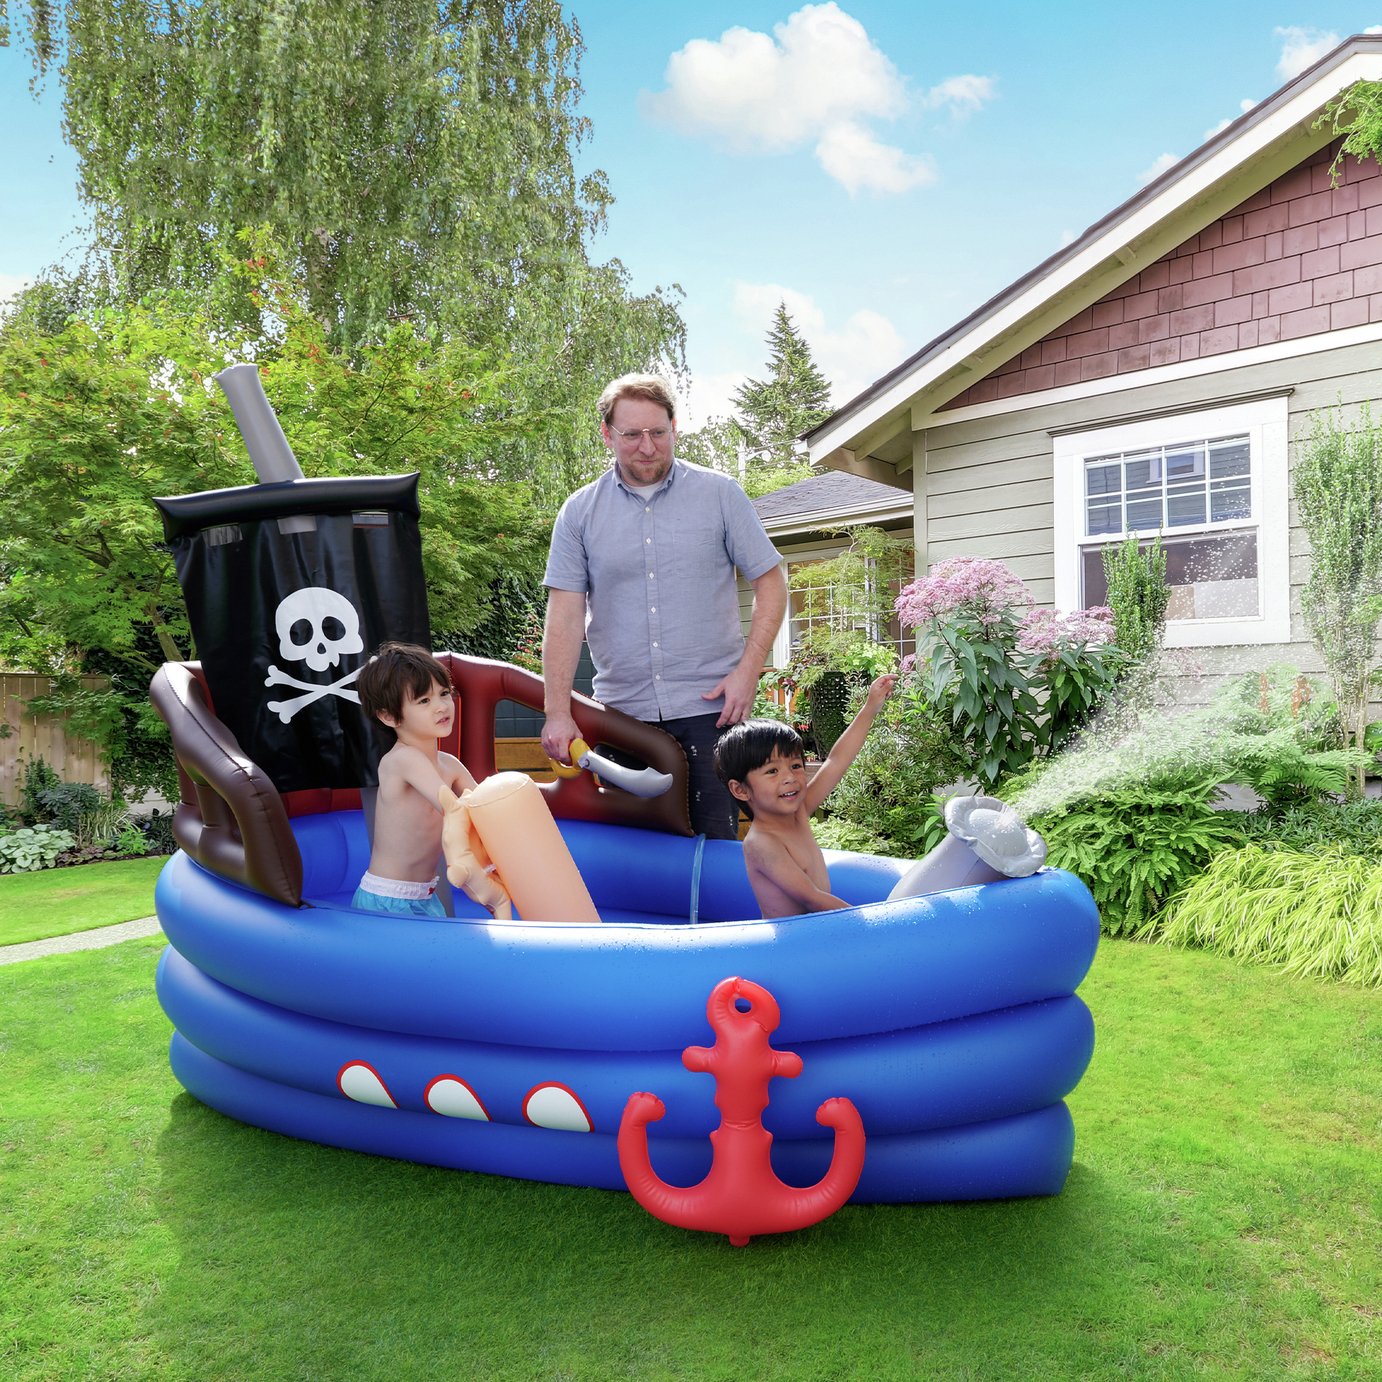 Teamson Kids 8ft Pirate Inflatable Water Play Centre Review